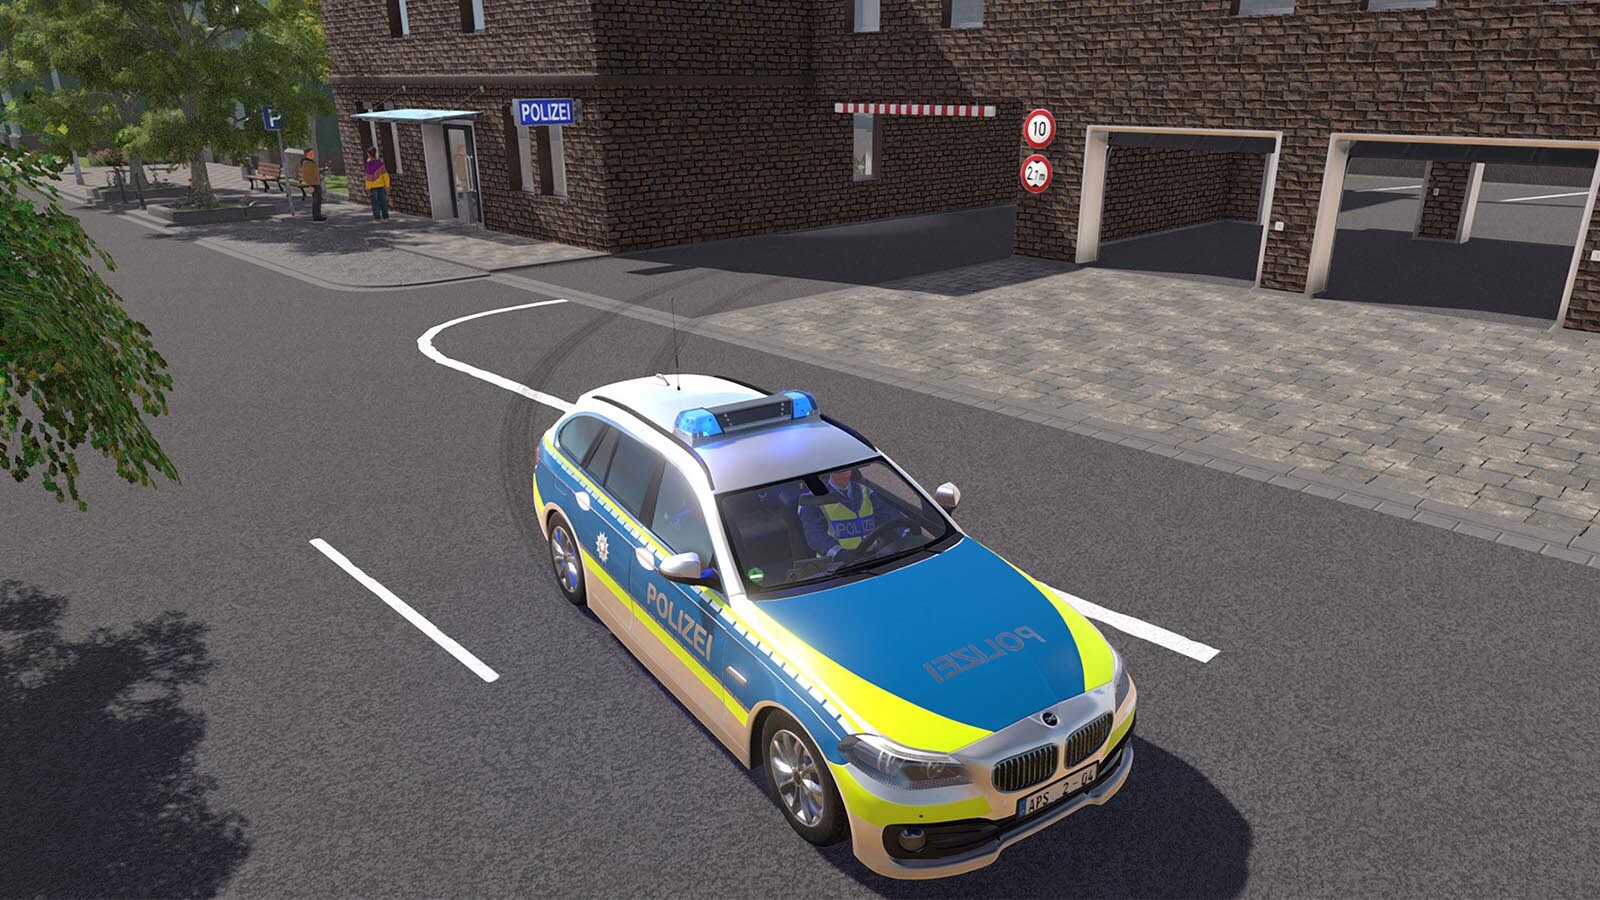 Simulator Steam now 2 Police - Autobahn Key for PC Buy